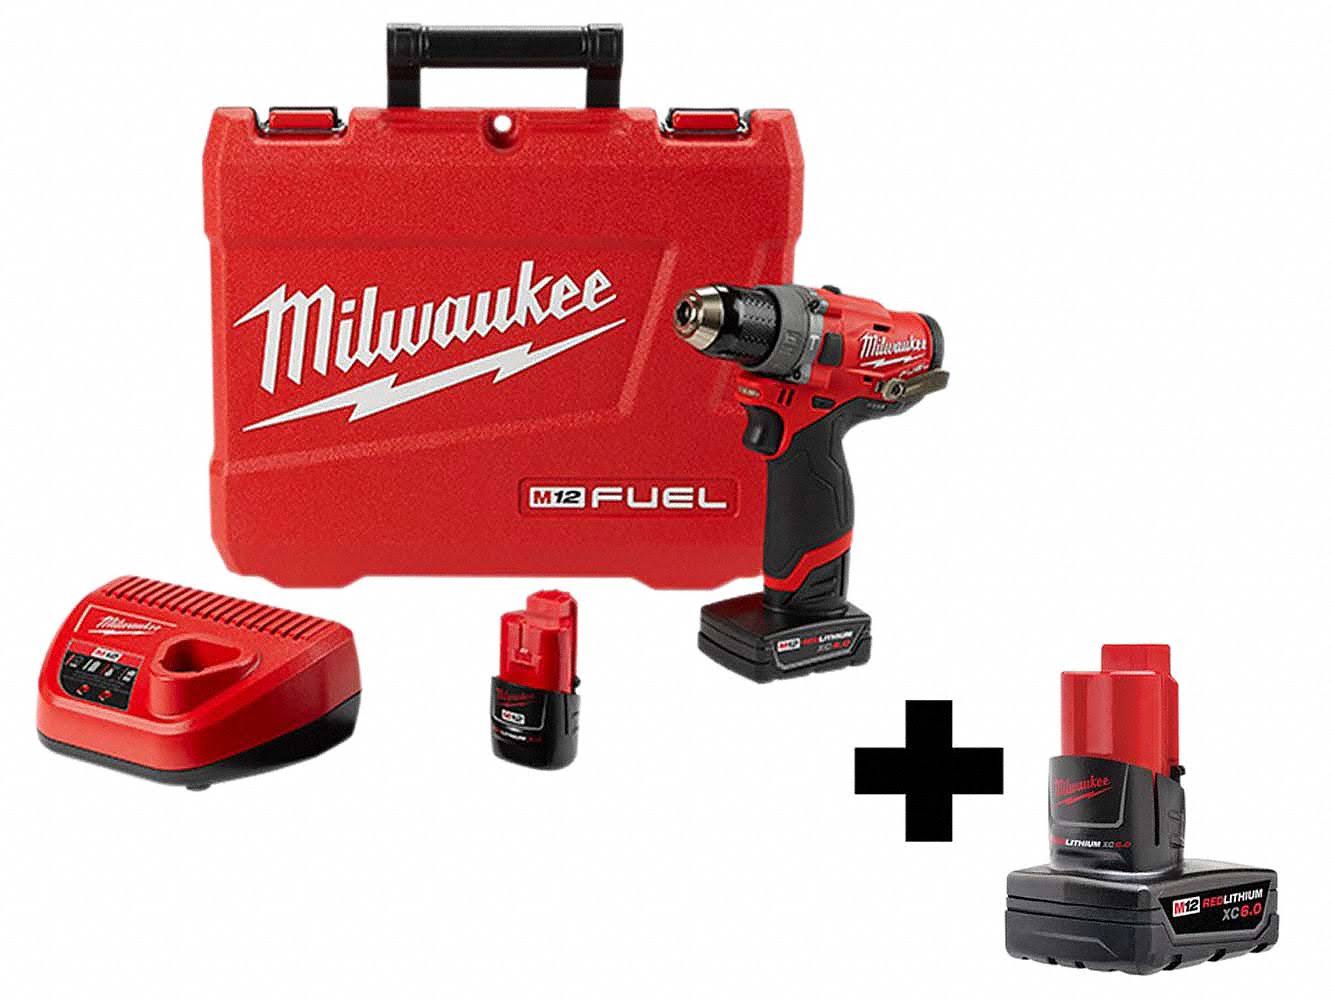 Milwaukee 2504-22 M12 Fuel Lithium Ion Hammer Drill Kit - with 4.0ah and 2.0ah Battery and Hard Case